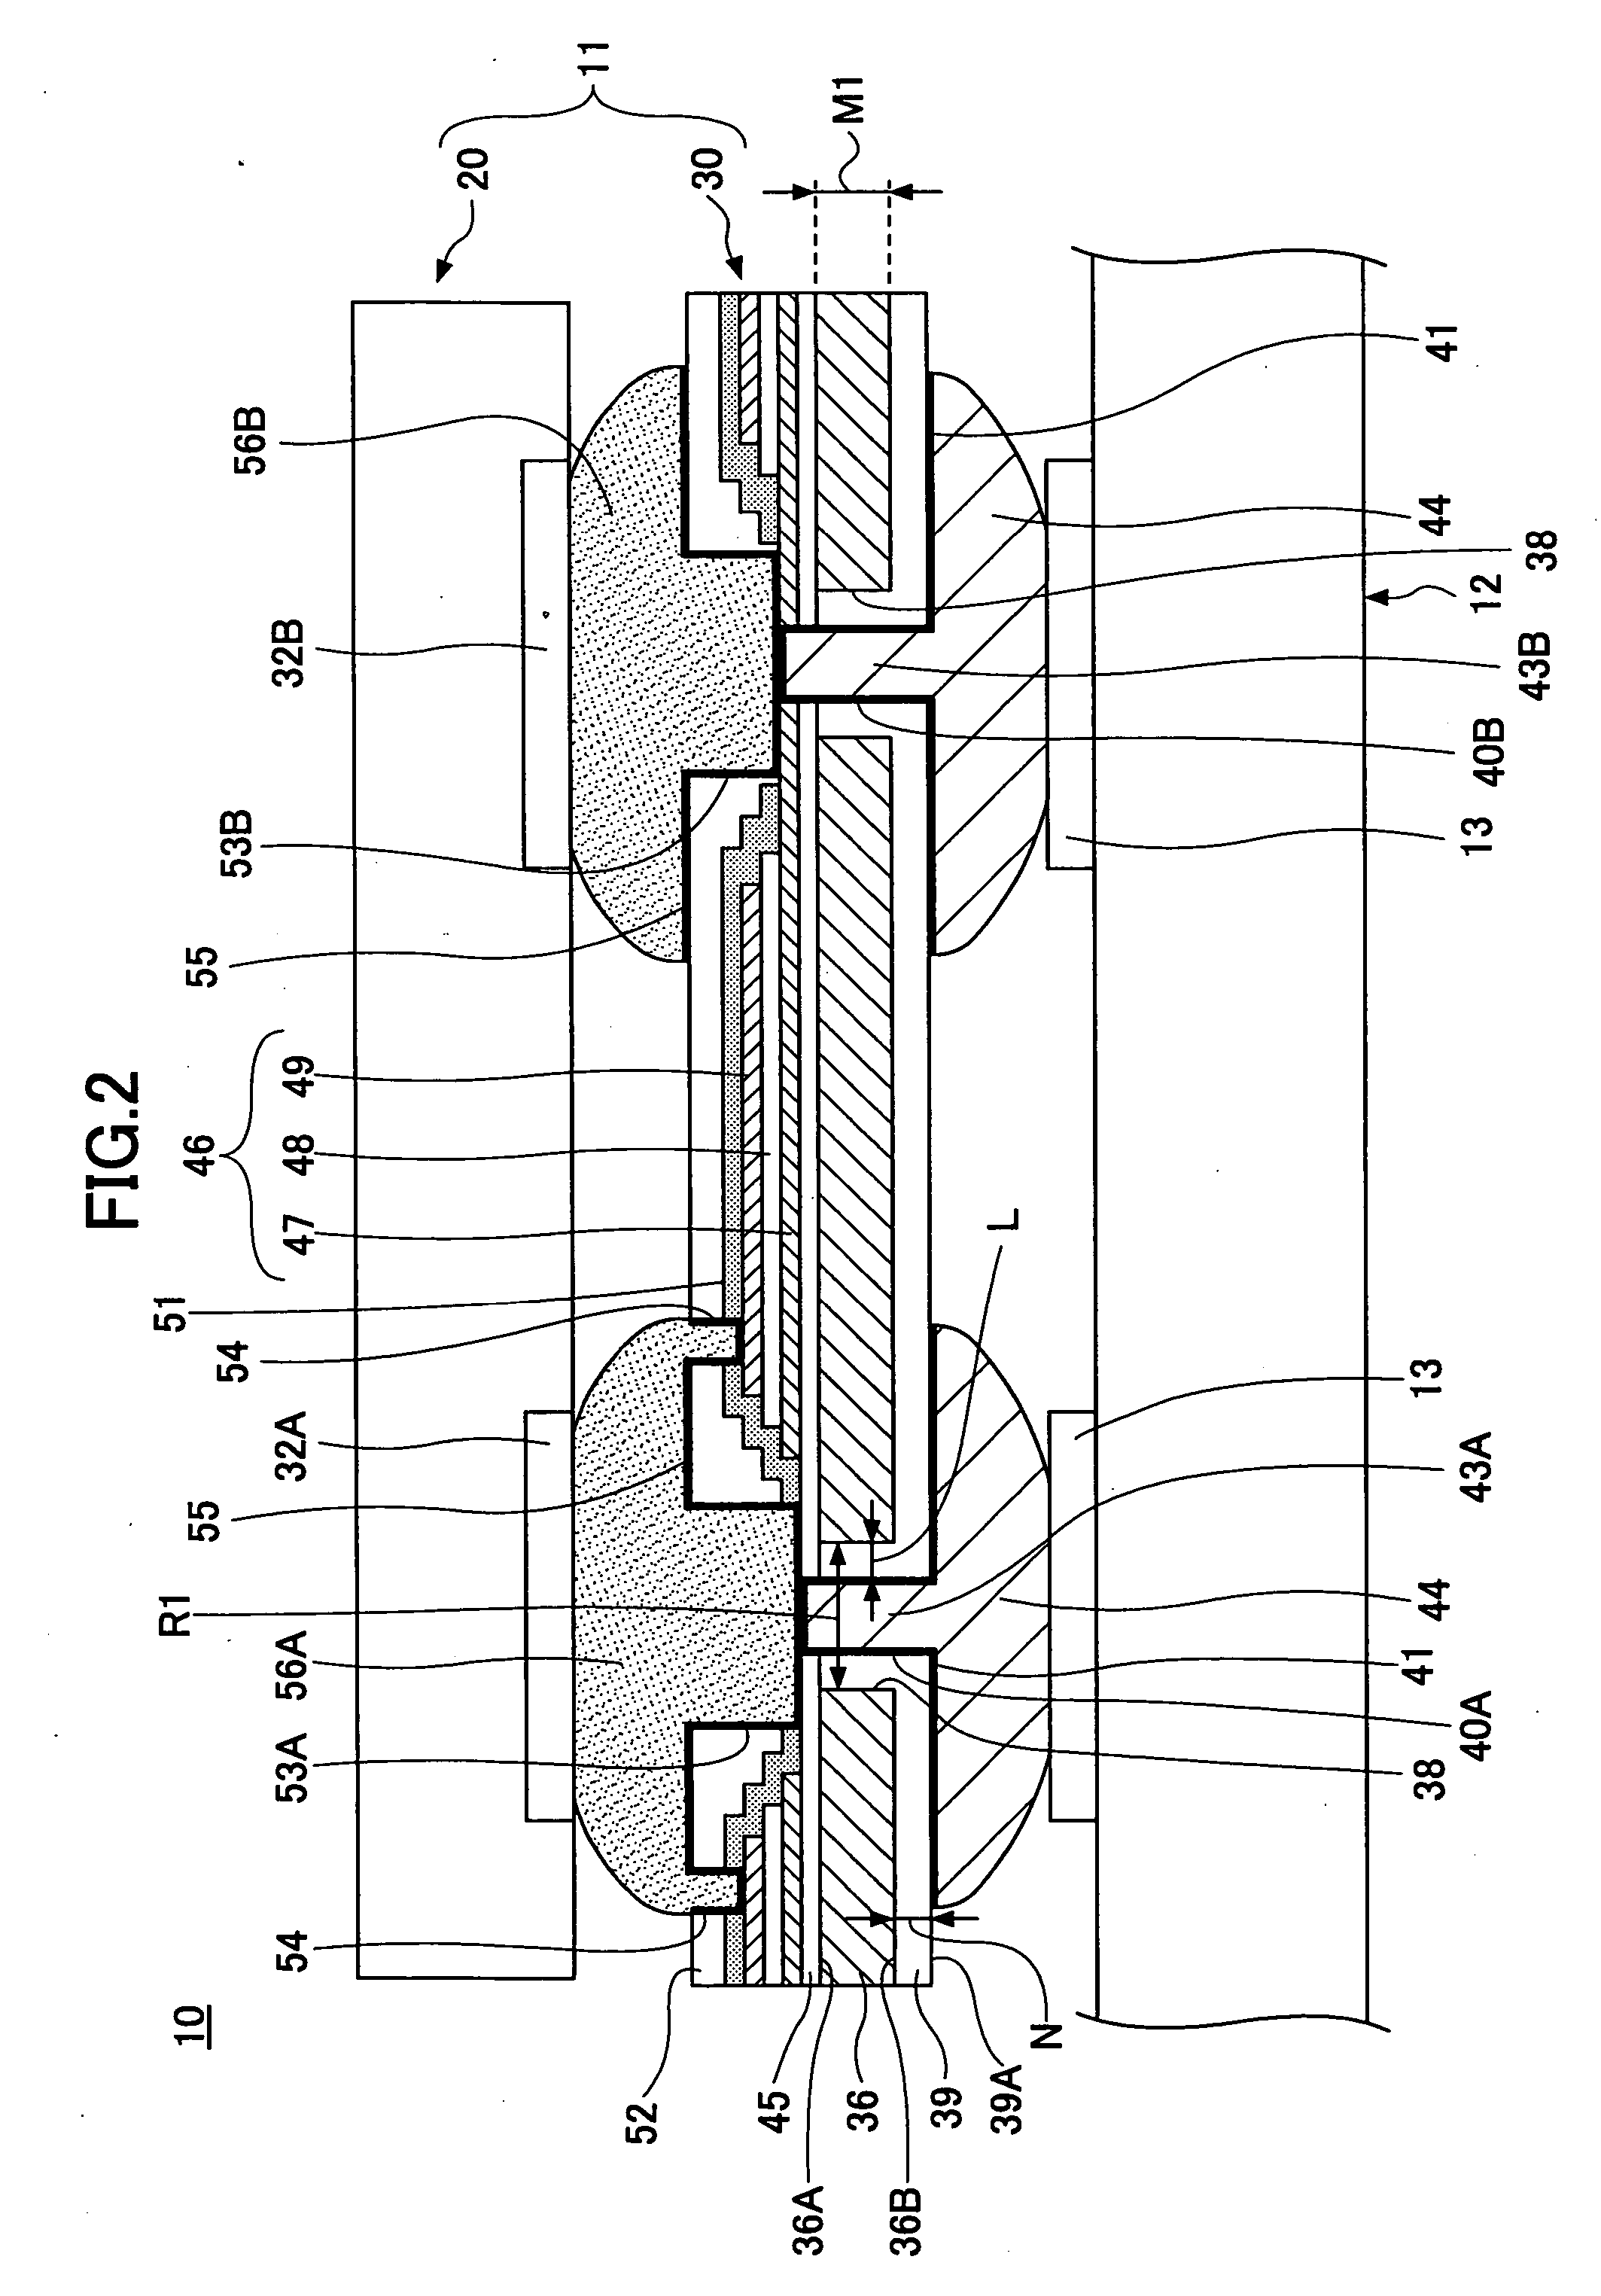 Semiconductor device, method of manufacturing the same, capacitor structure, and method of manufacturing the same